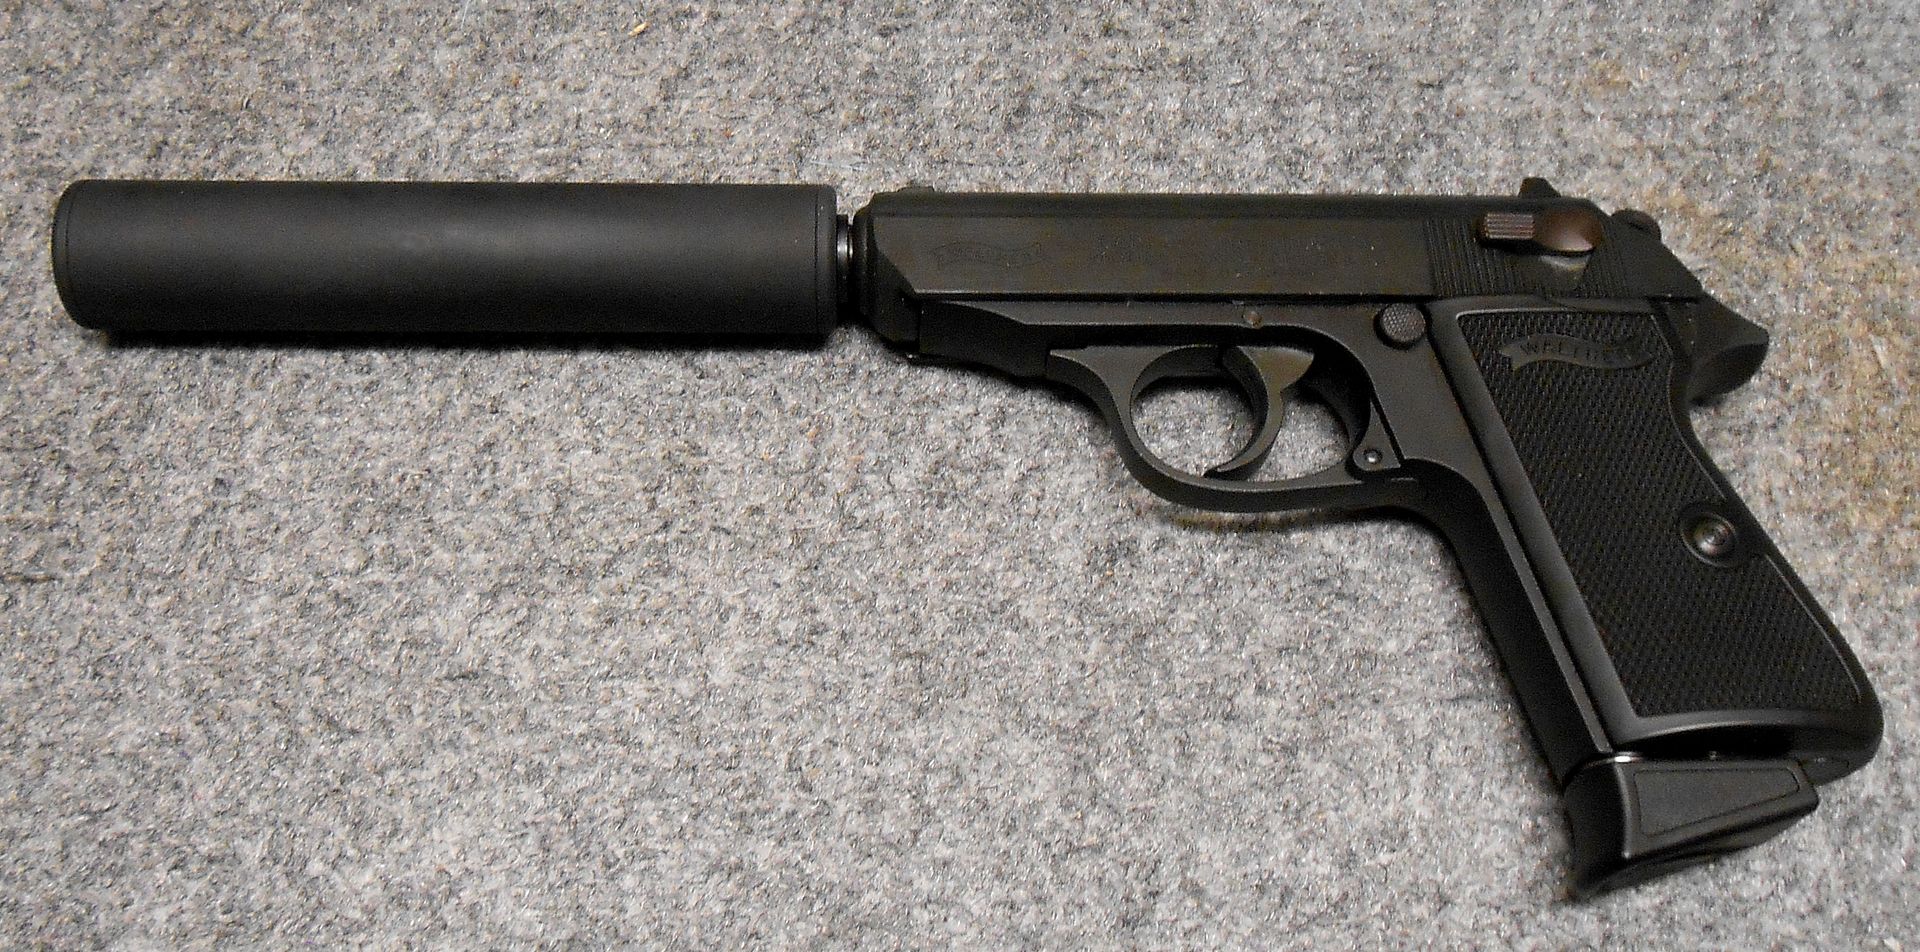 Tactical Innovations thread adapter and display (fake) suppressor. http://w...